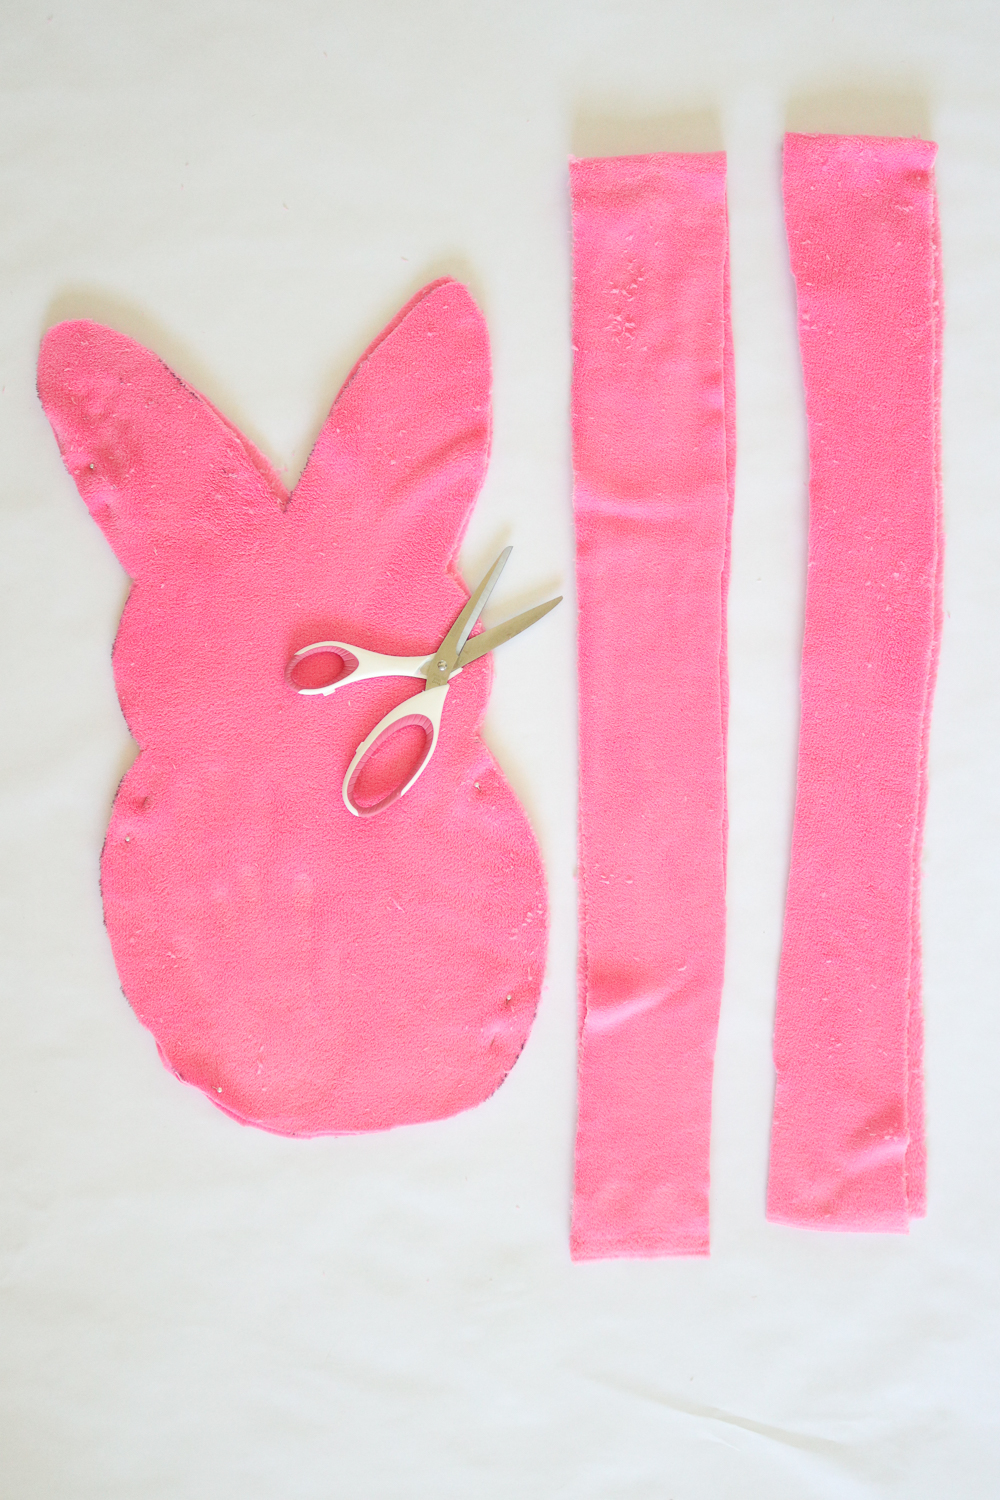 DIY Peeps Pillow | Club Crafted